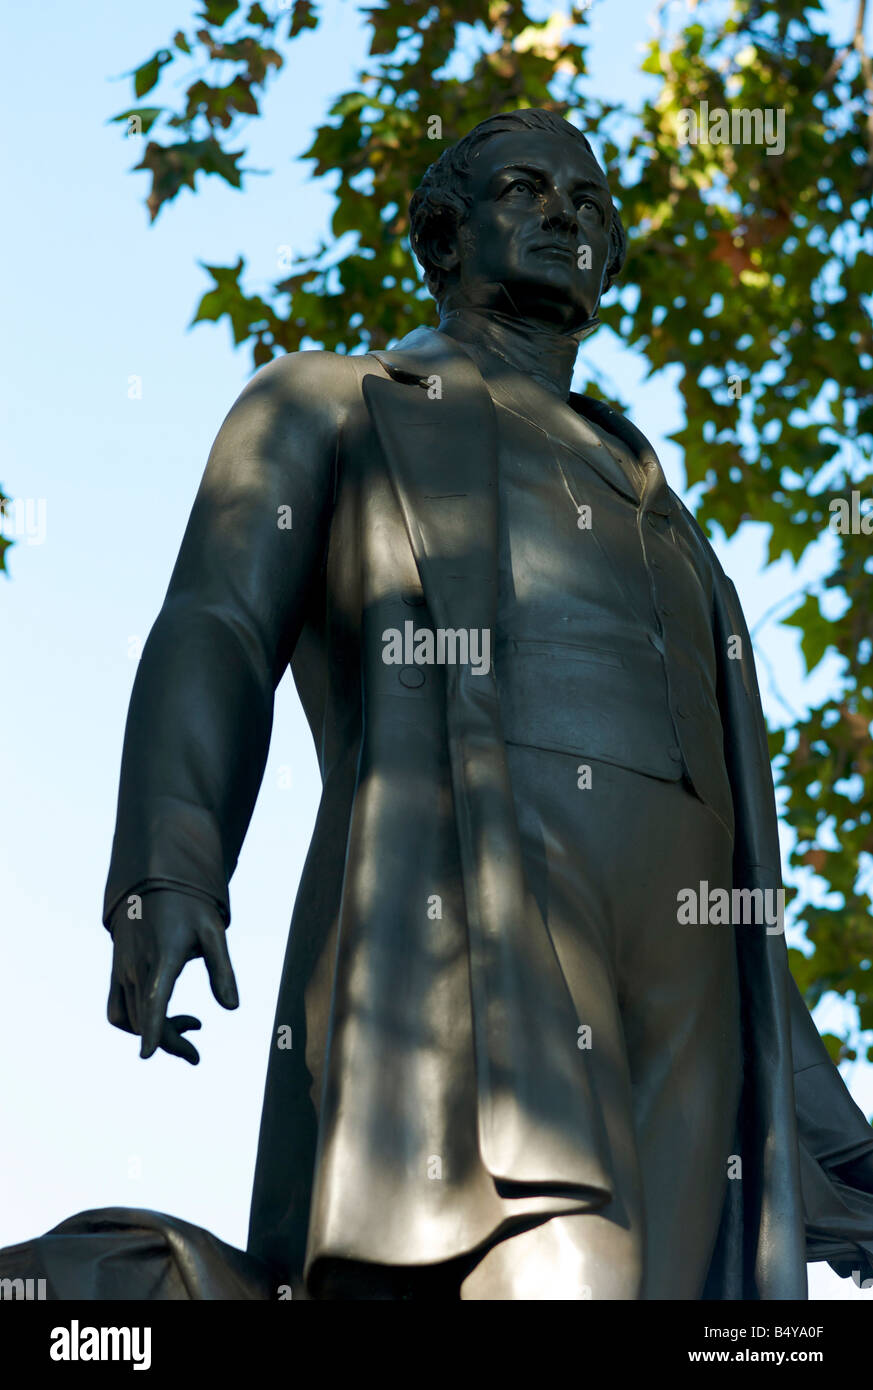 Statue of Sir Robert Peel founder of the modern police force situated in Parliament Square London UK Stock Photo